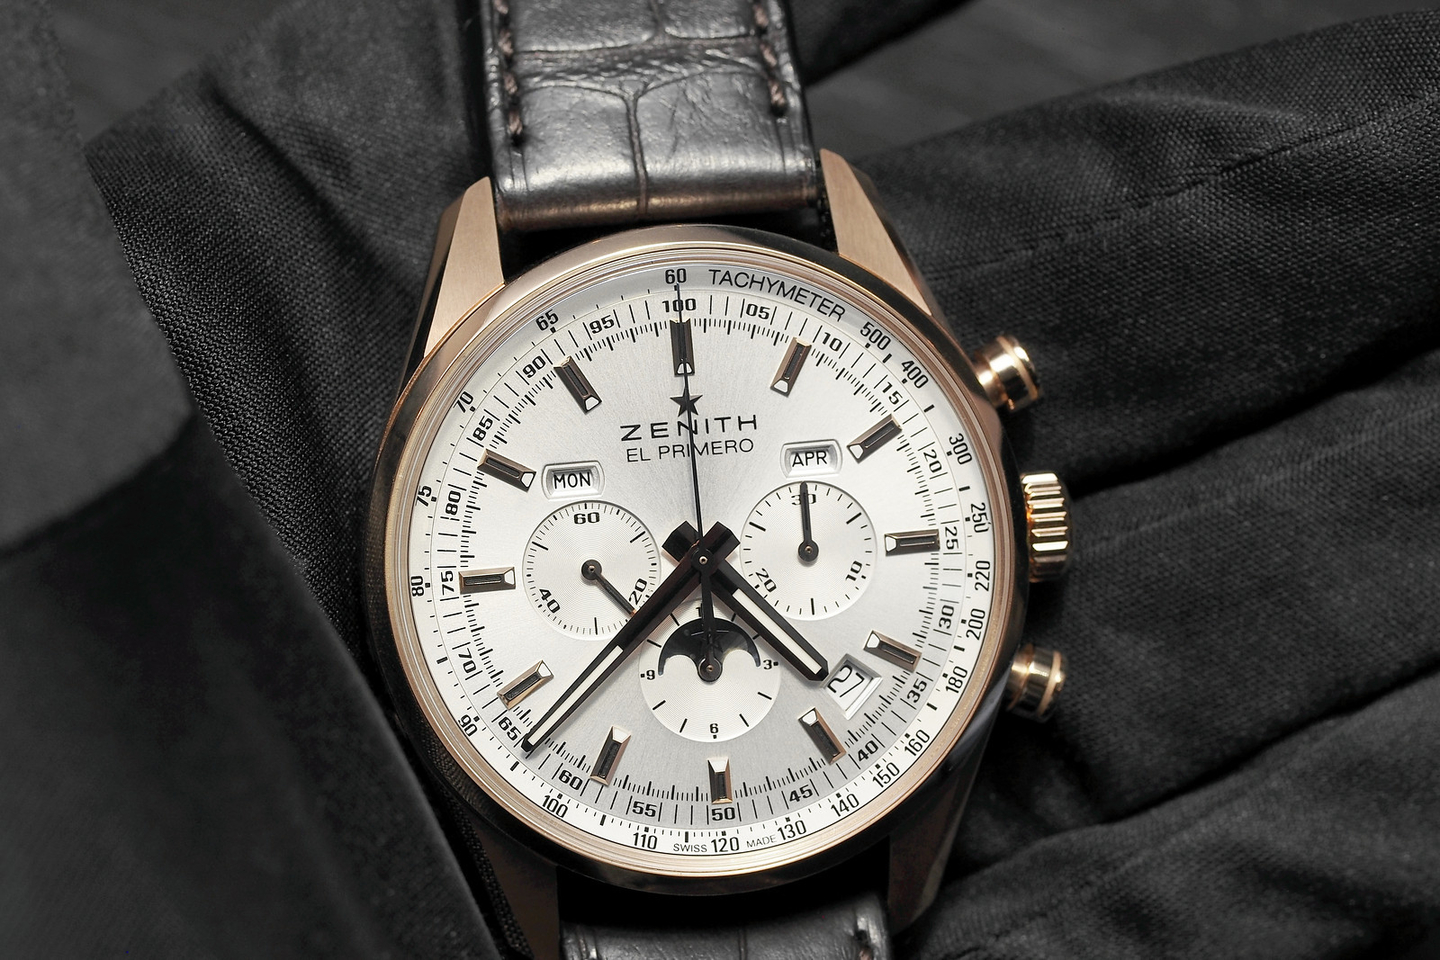 Hands-On with the Zenith El Primero 410 Triple Calendar Chronograph and Moon Phase